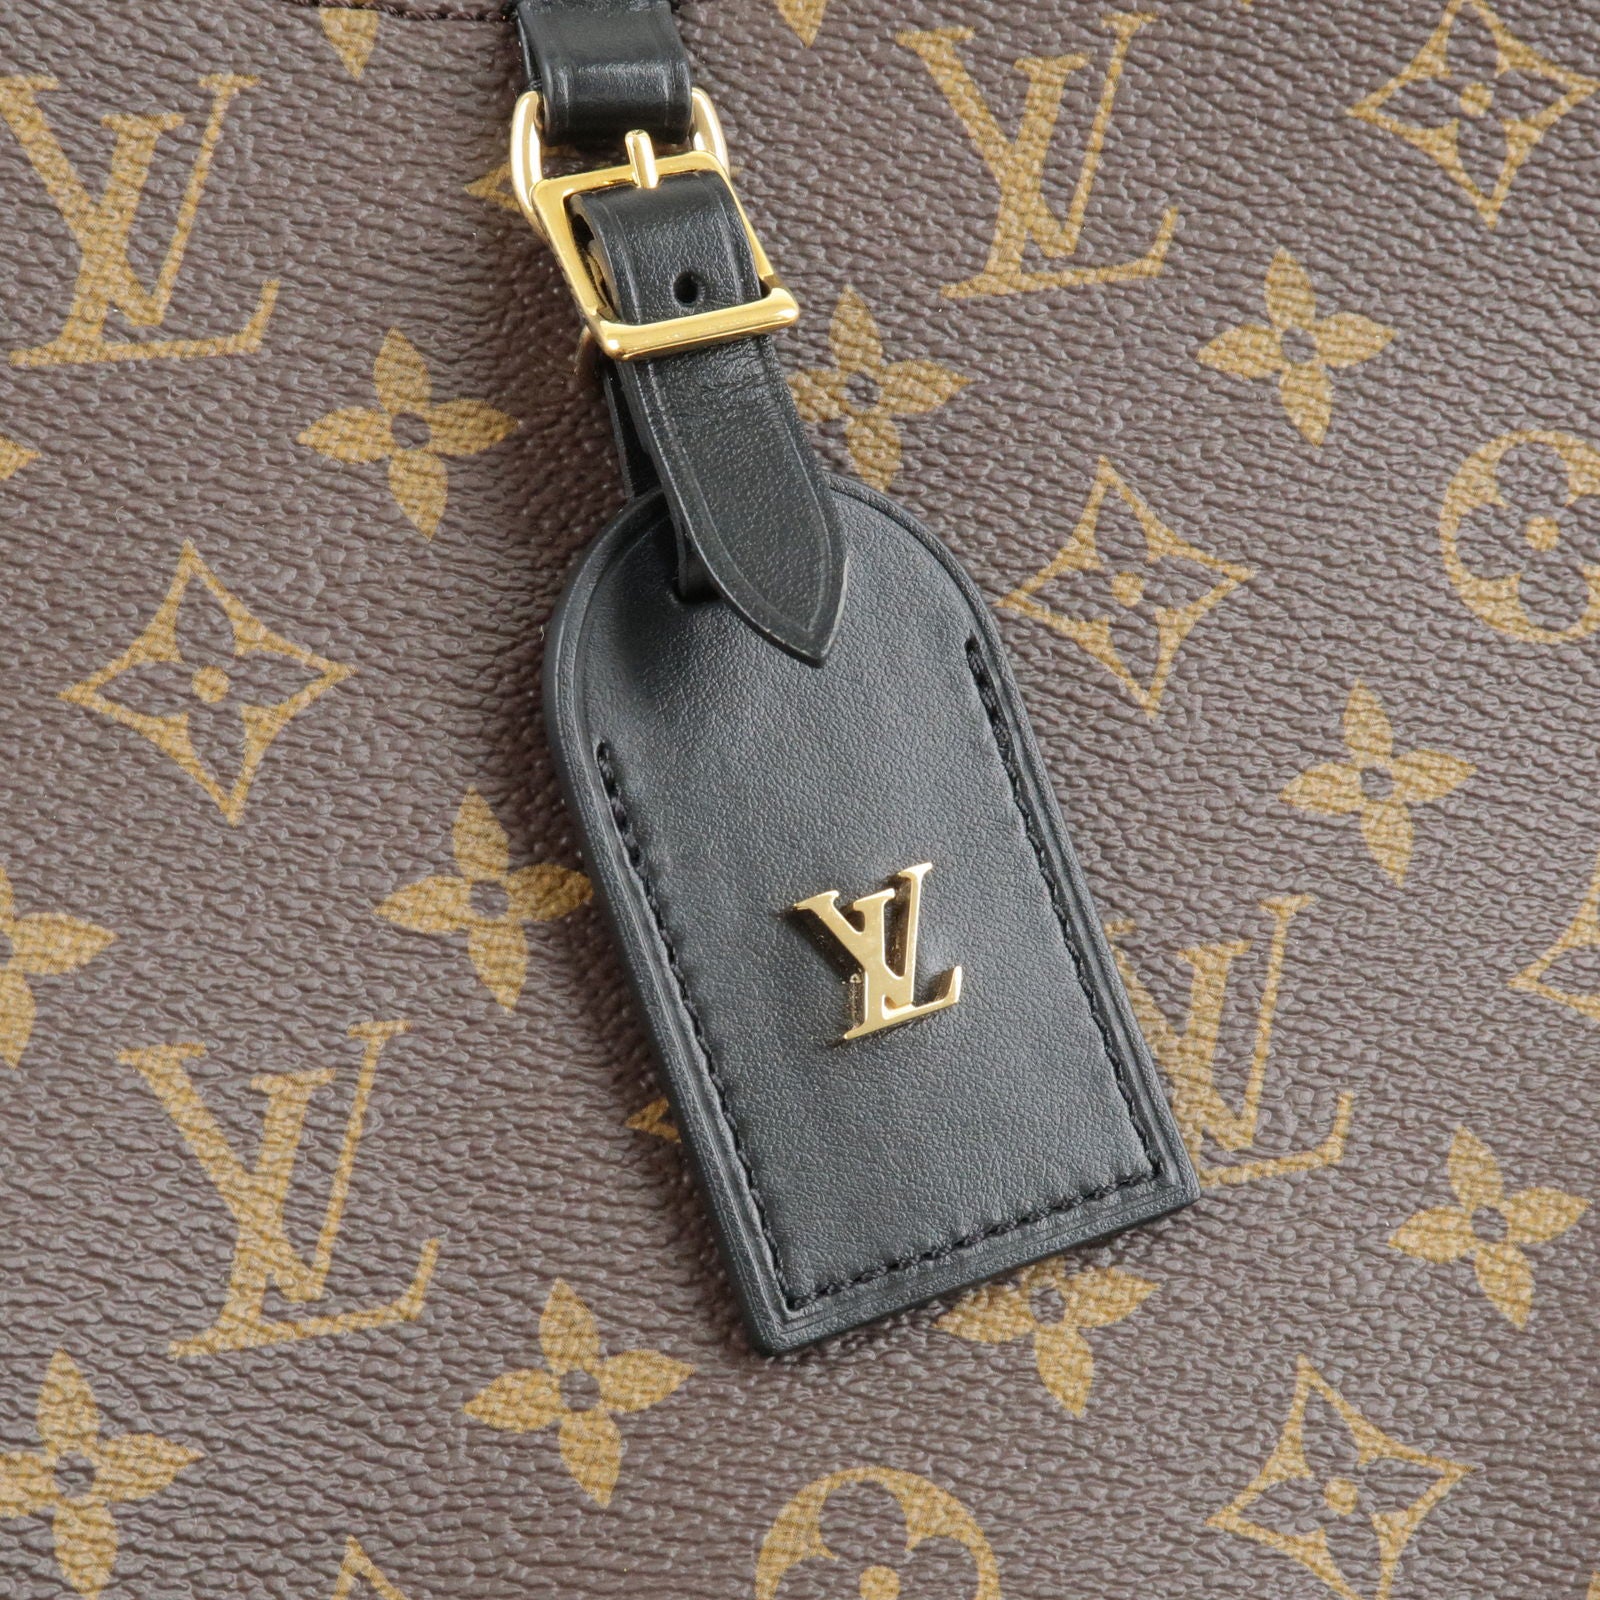 Bag  Odeon  Monogram  epvintage luxury Store  NM  Noir  Vuitton  MM   Christies 7938 199801 Collection of Louis Vuitton luggage  Crossbody   Louis  M45352  dct